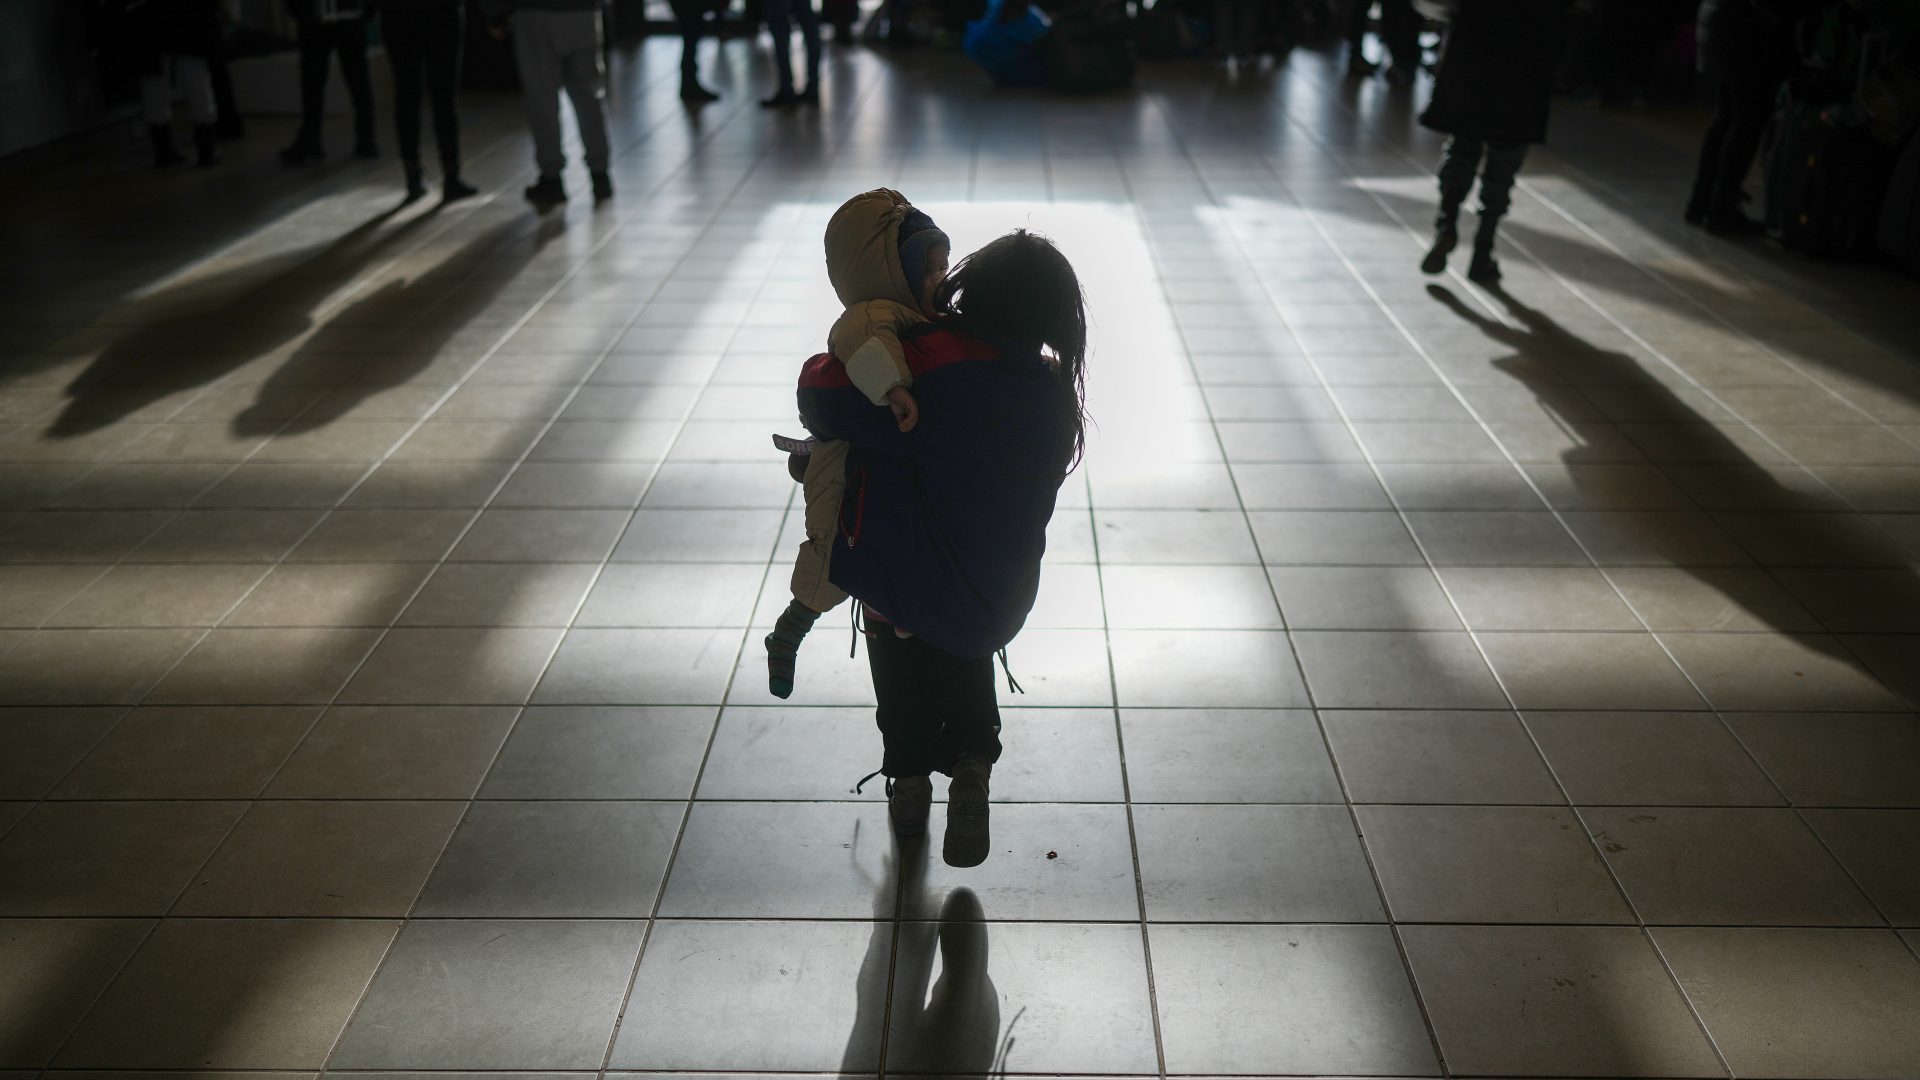 A refugee girl carries a sibling after arriving at the Hungarian border town of Zahony on a train that has come from Ukraine. Photo: Christopher Furlong/Getty Images